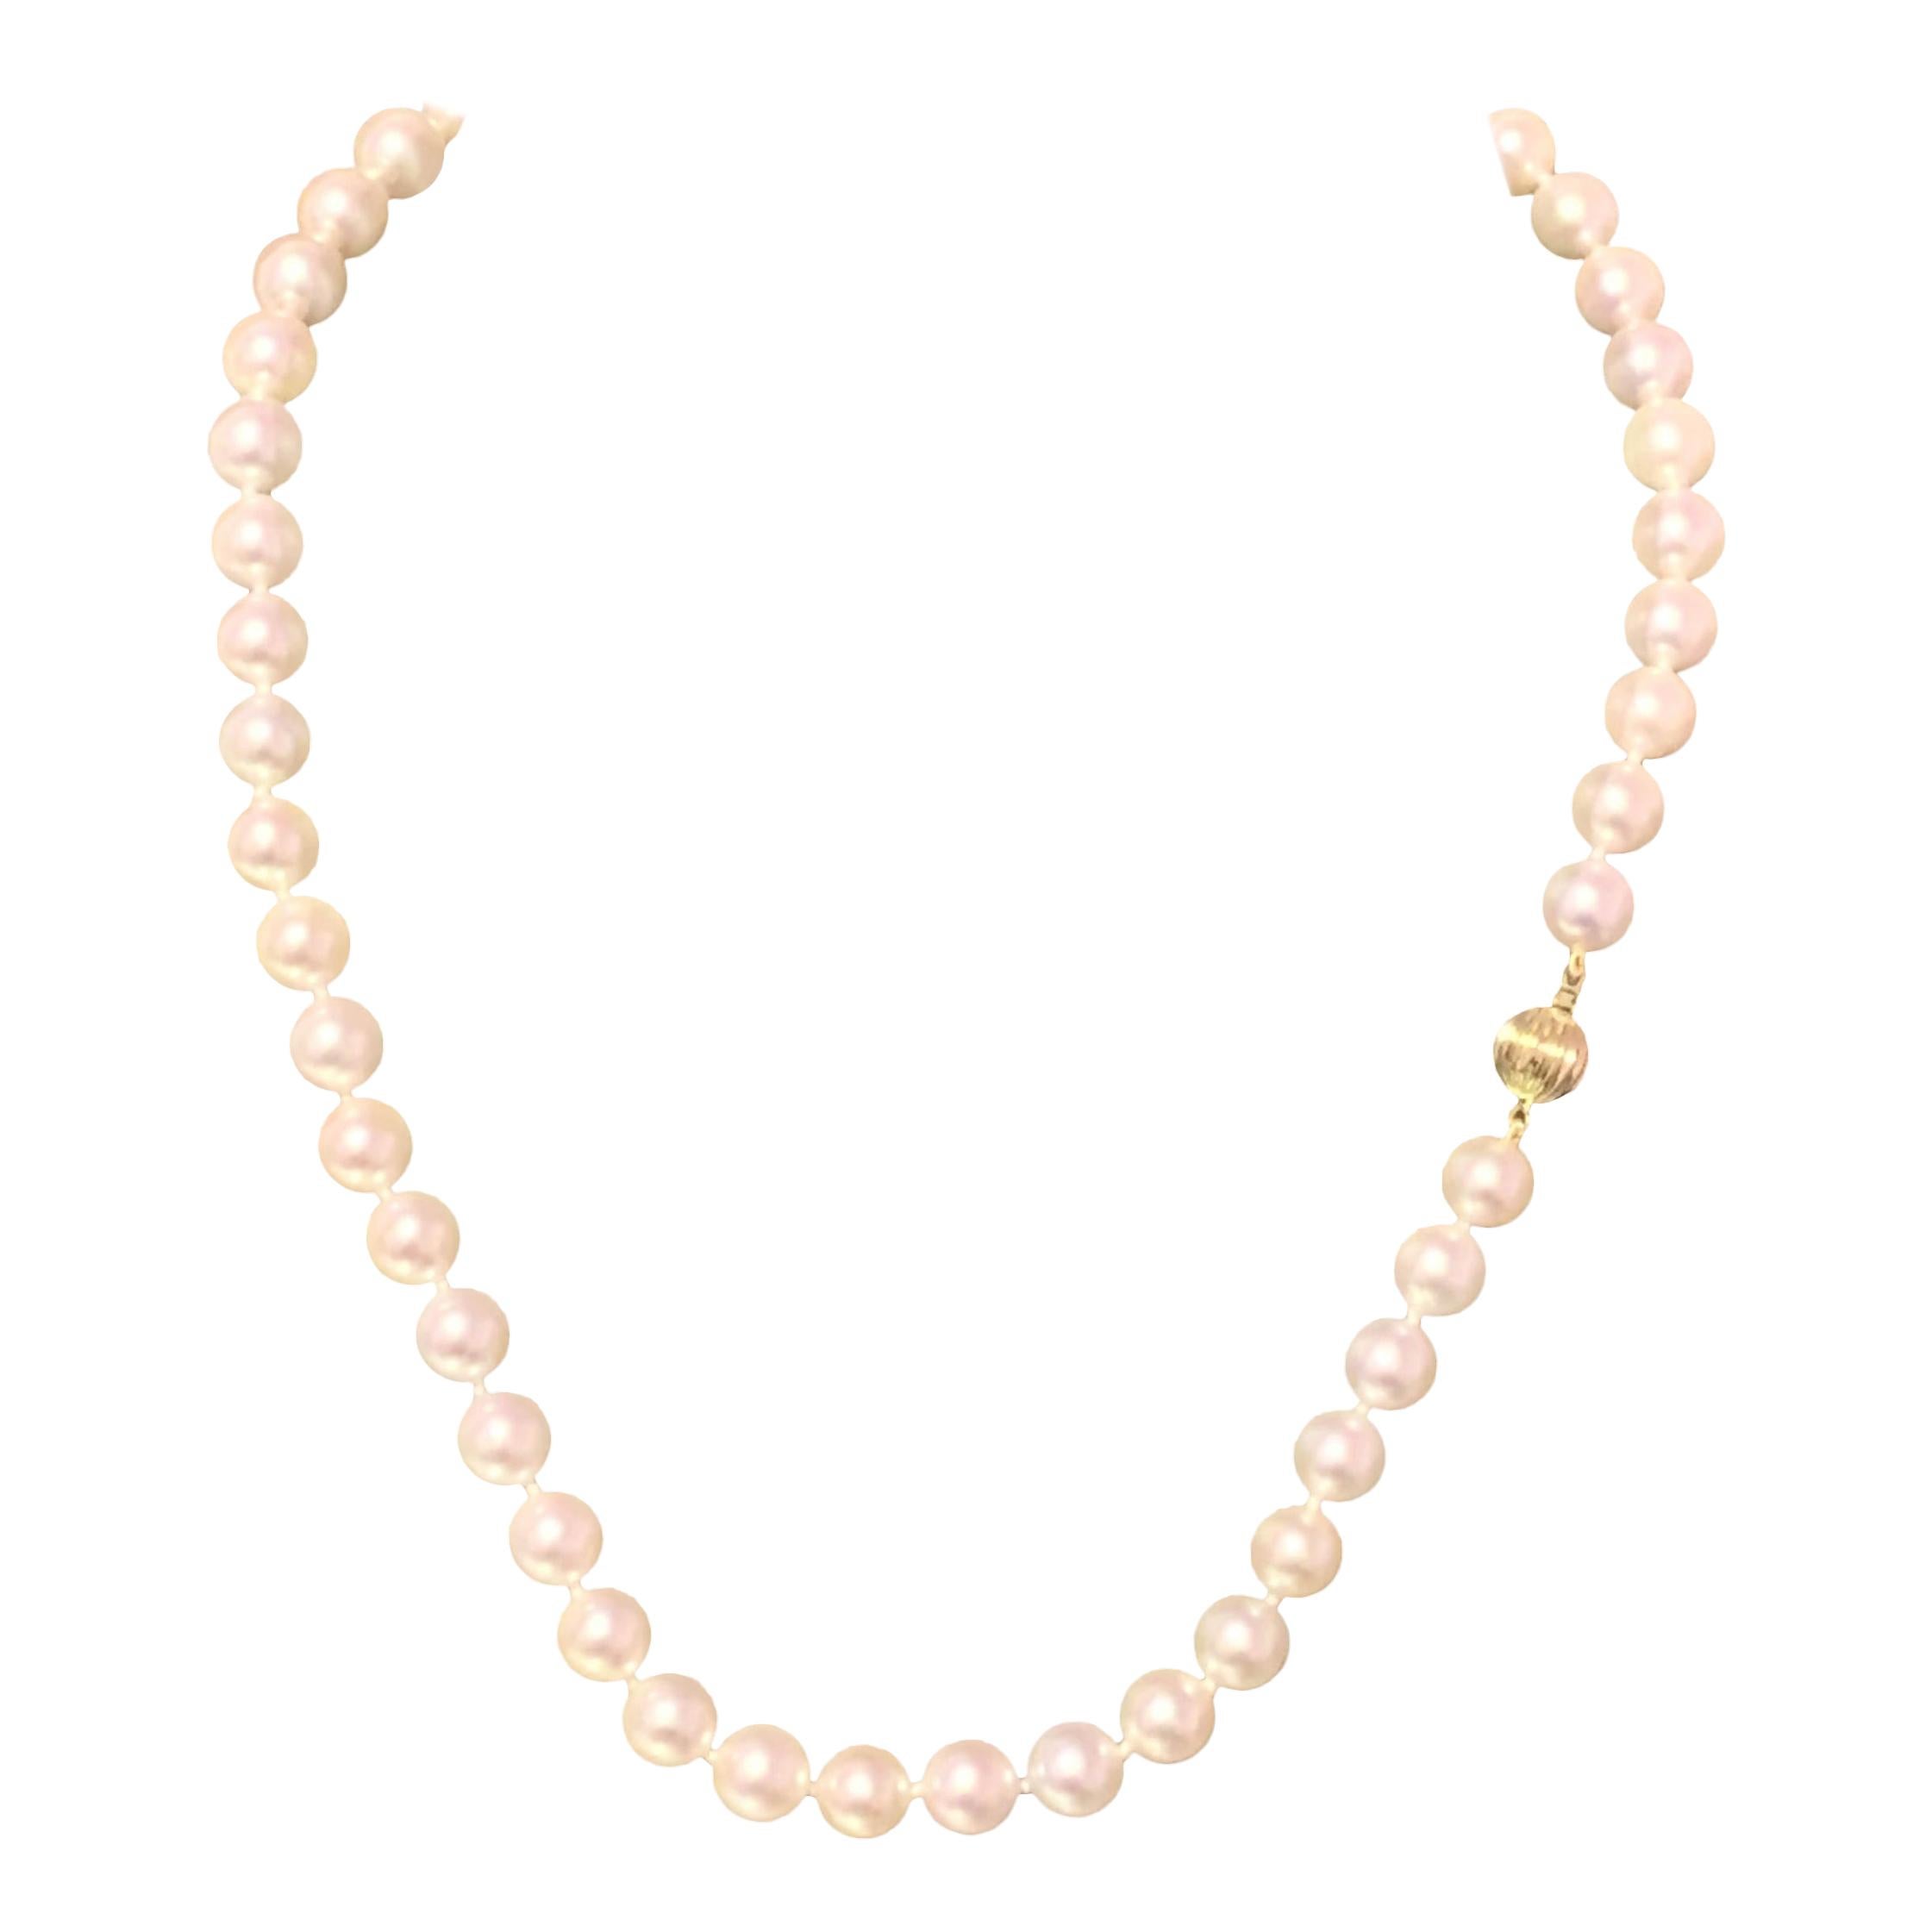 Akoya Pearl Necklace 14k Gold 17" 8 mm Certified